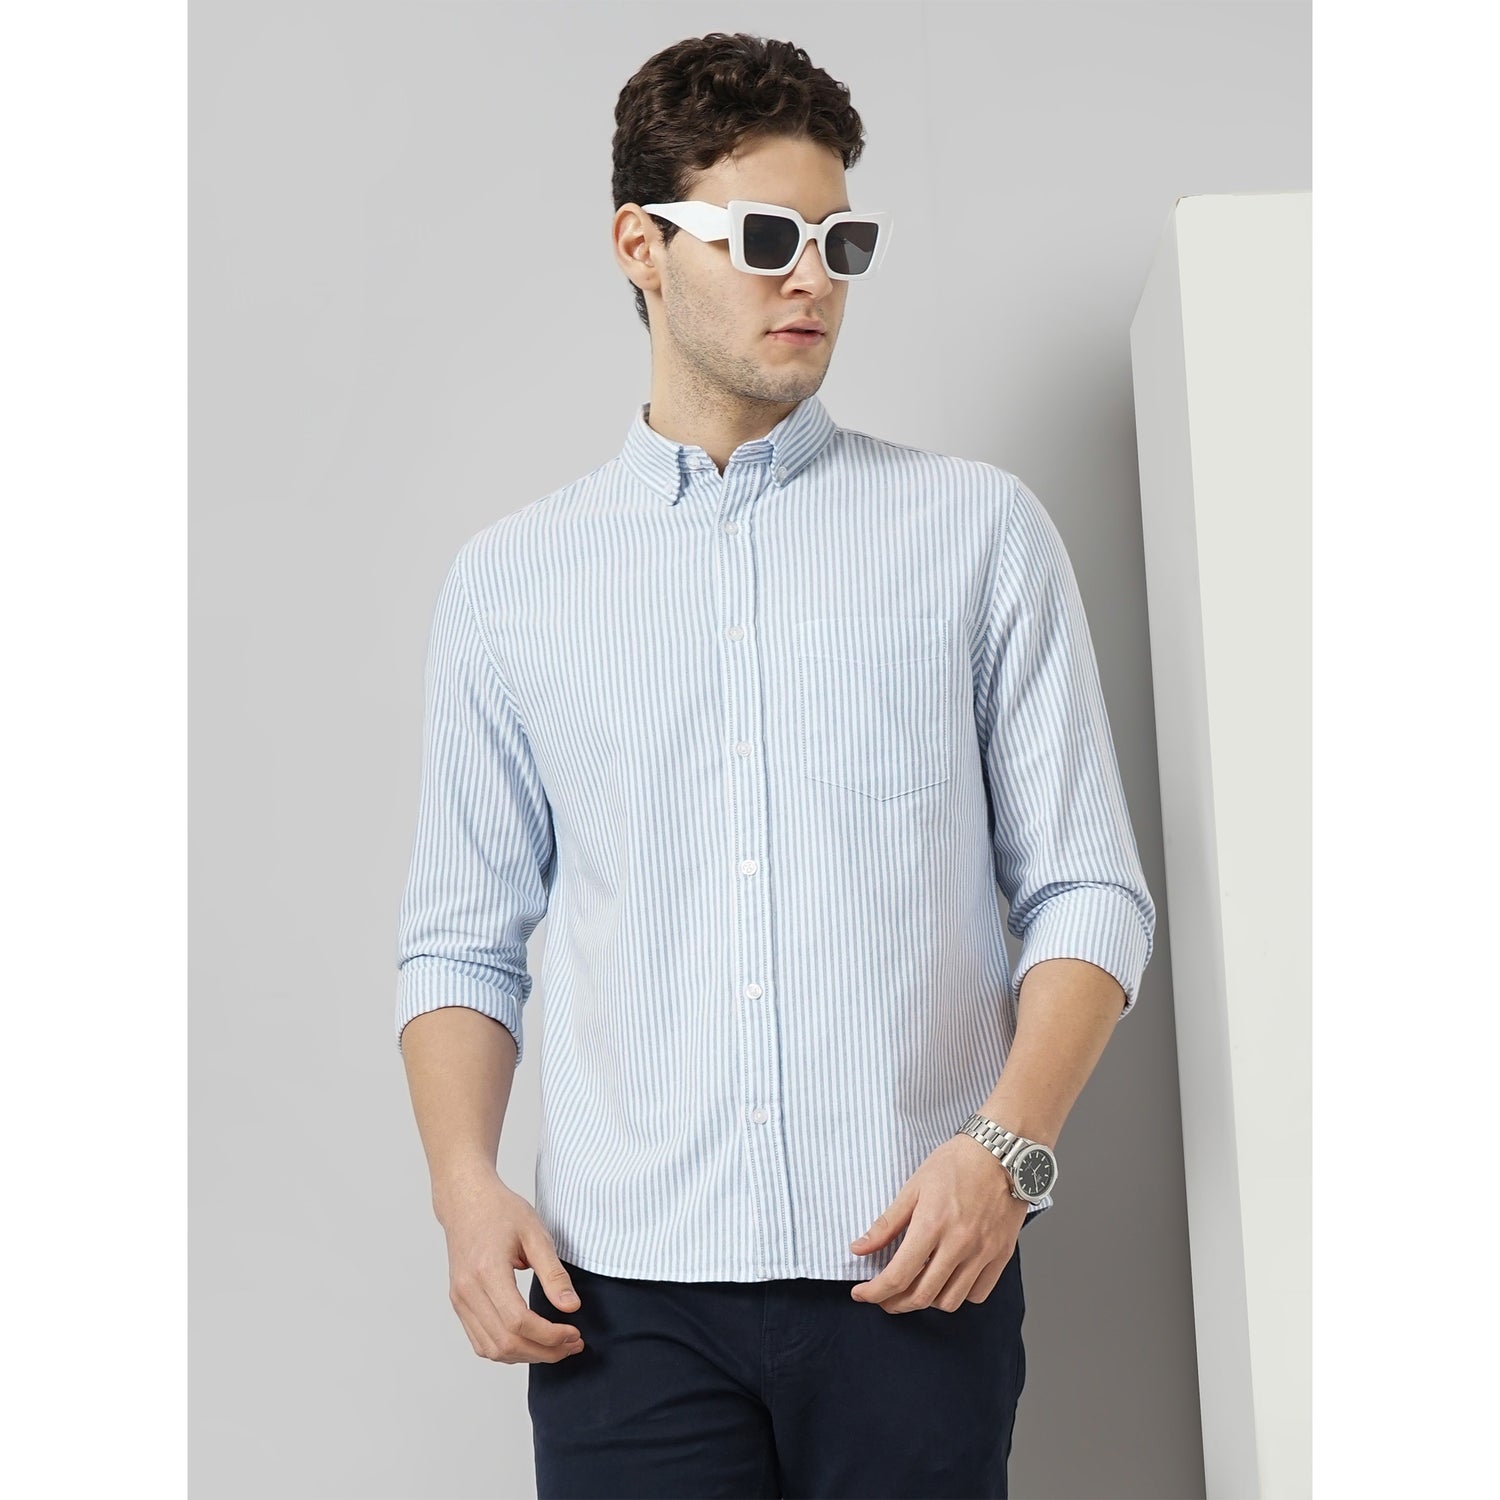 Blue Classic Striped Casual Cotton Shirt (CAOXFORDY)